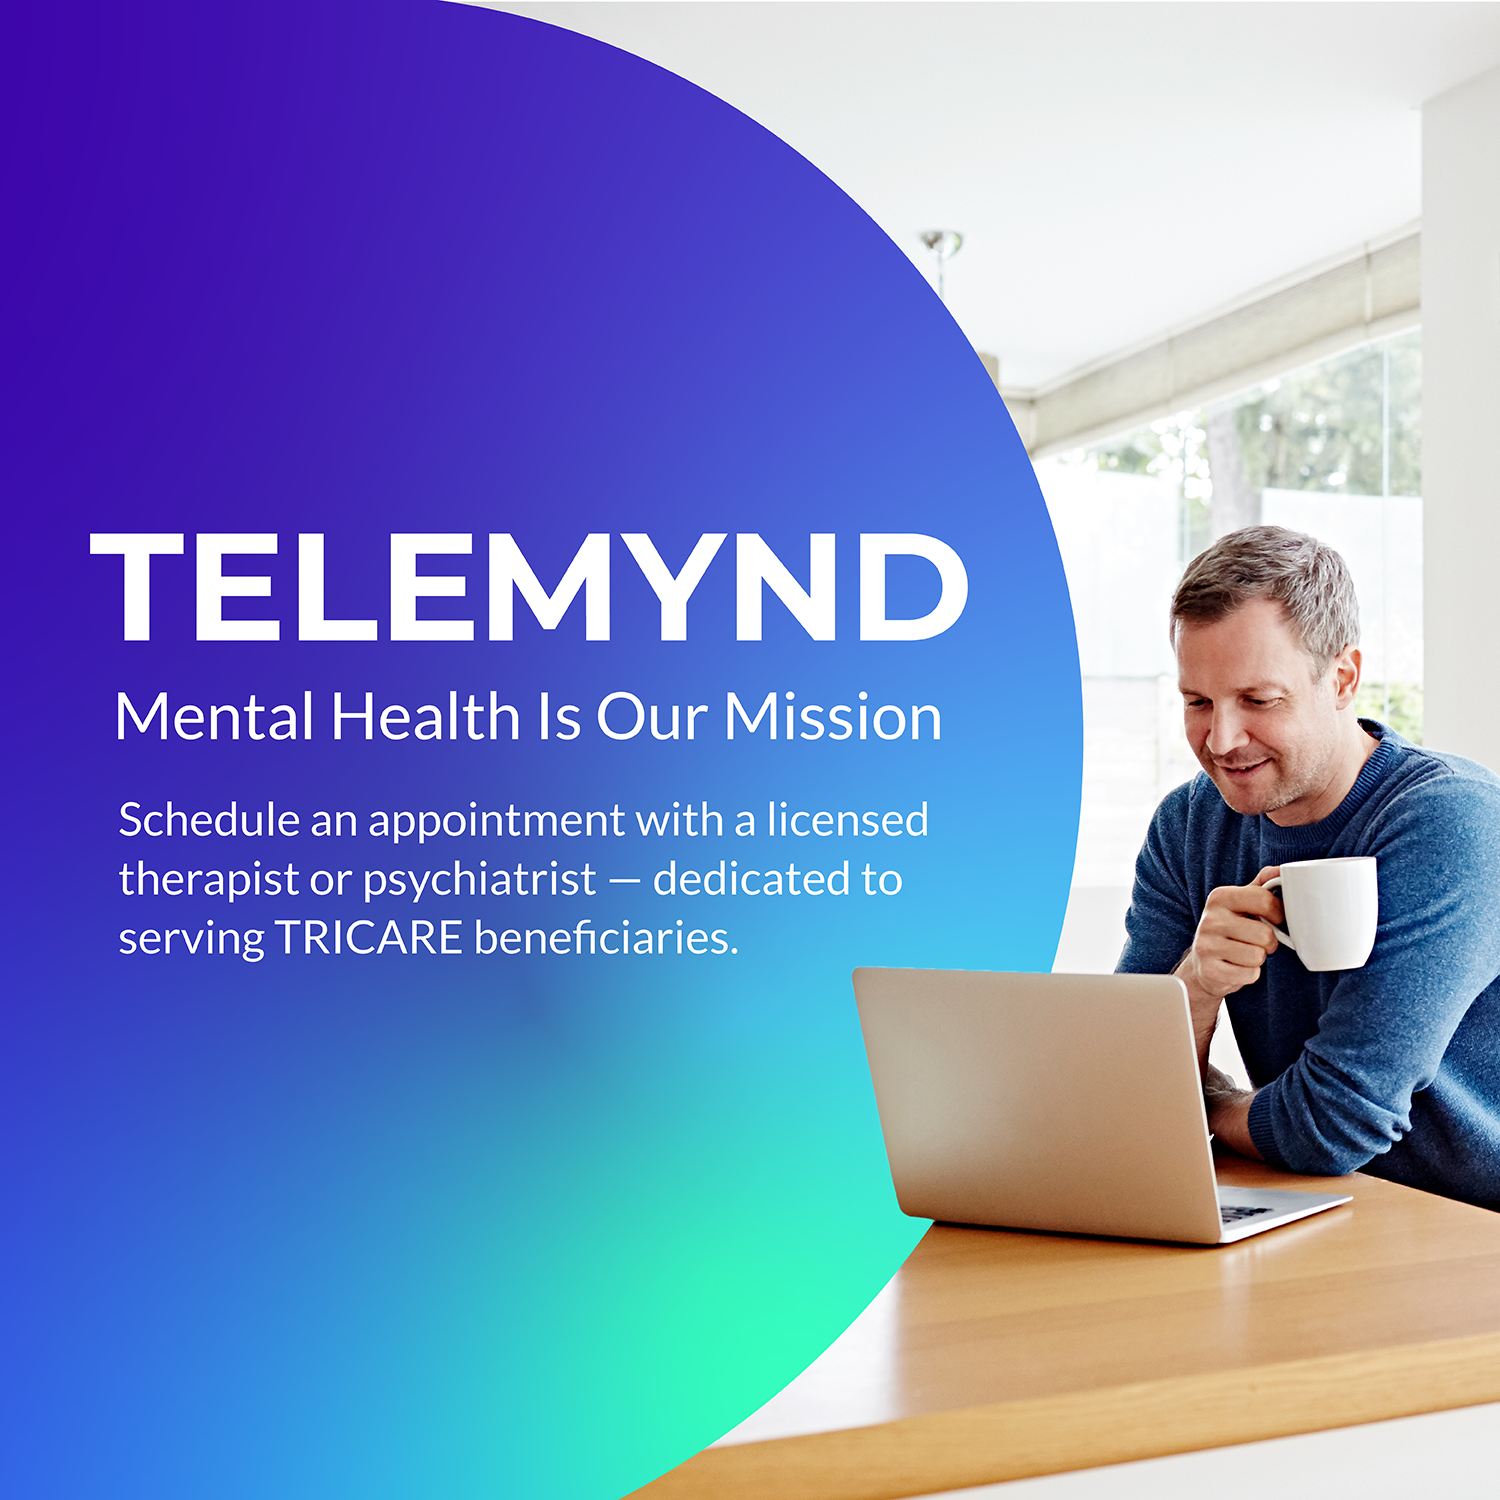 Telemynd logo and text "Revolutionizing Access To Behavioral Health, For All"